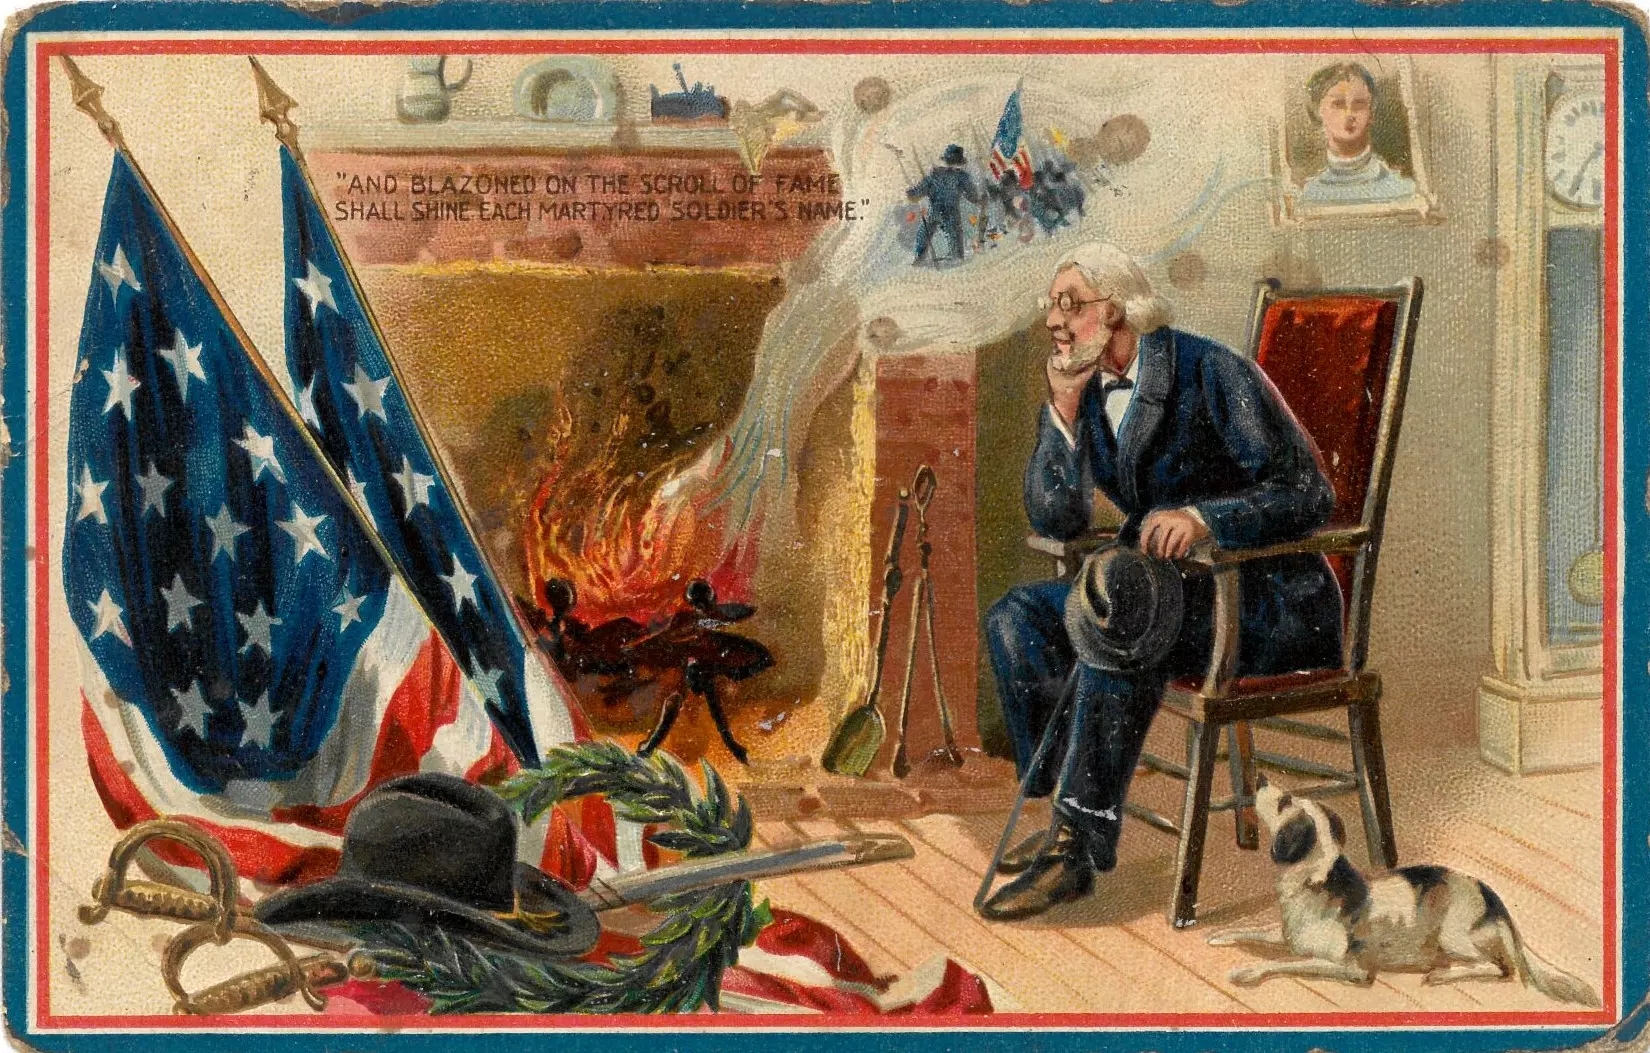 “’Decoration Day’ Series of Post Cards, No. 158,” cancelled June 3, 1912. Raphael Tuck & Son’s, 1908. Verse from “Gettysburg” by Francis De Haes Janvier, 1866.